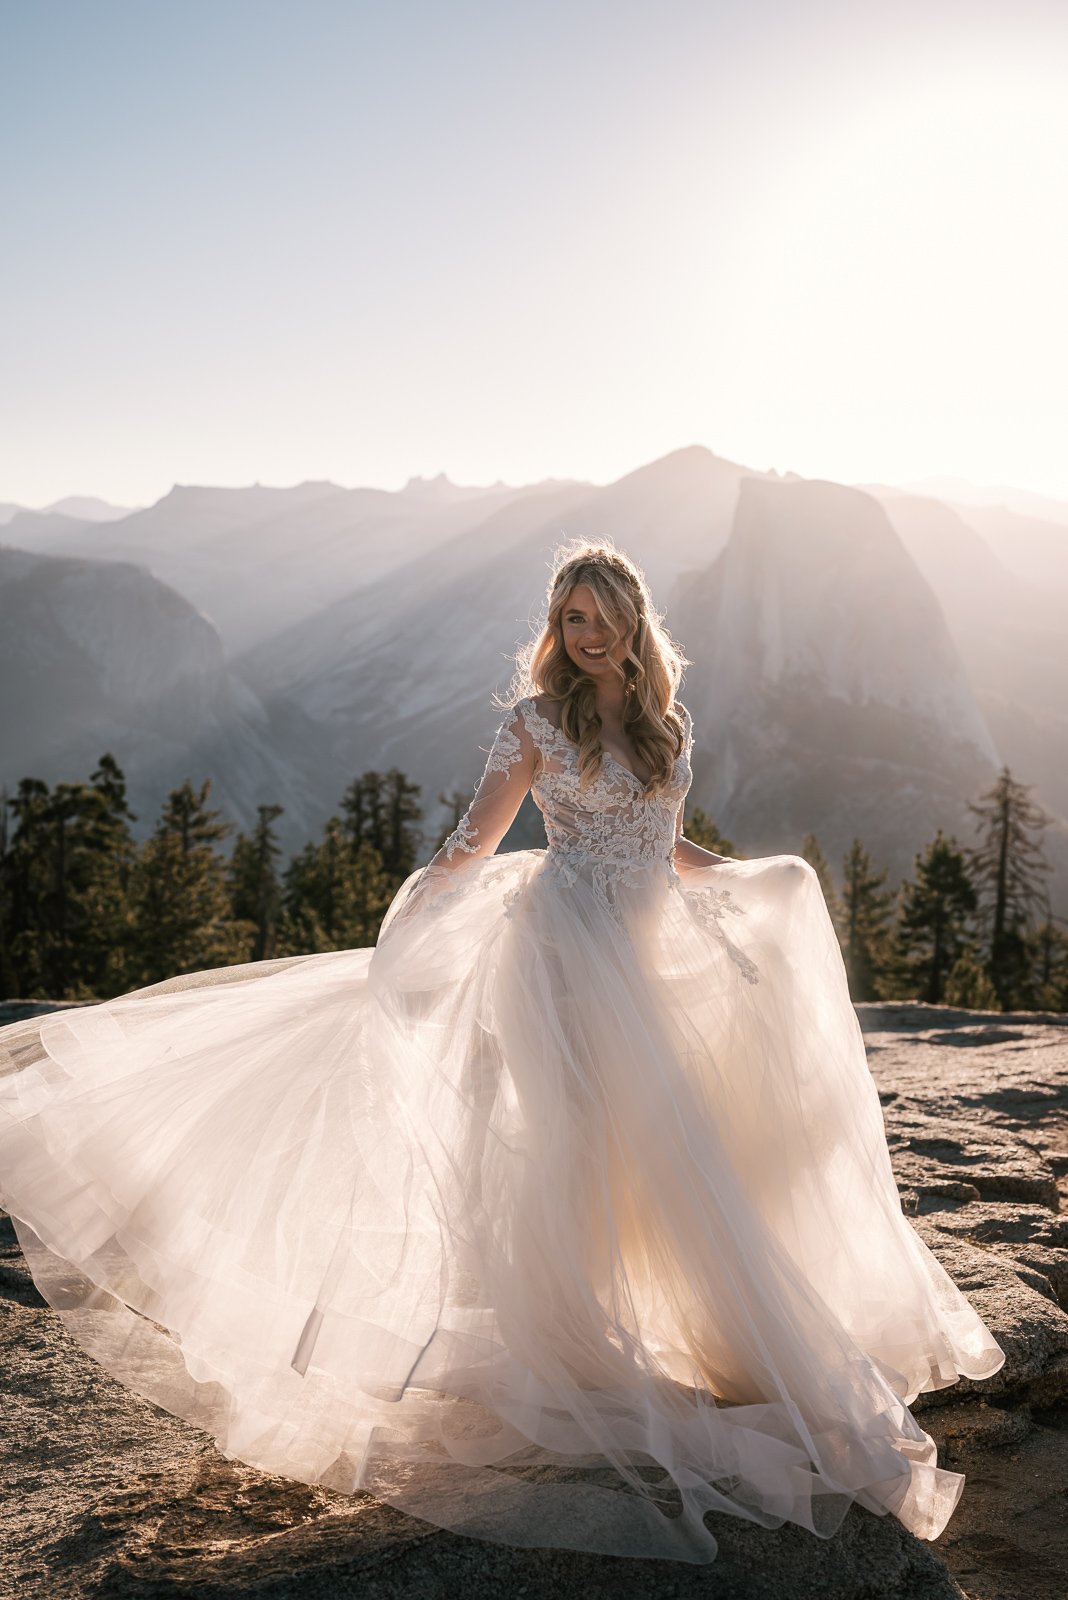 How To Choose The Best Veil For Your Dress - Rocky Mountain Bride